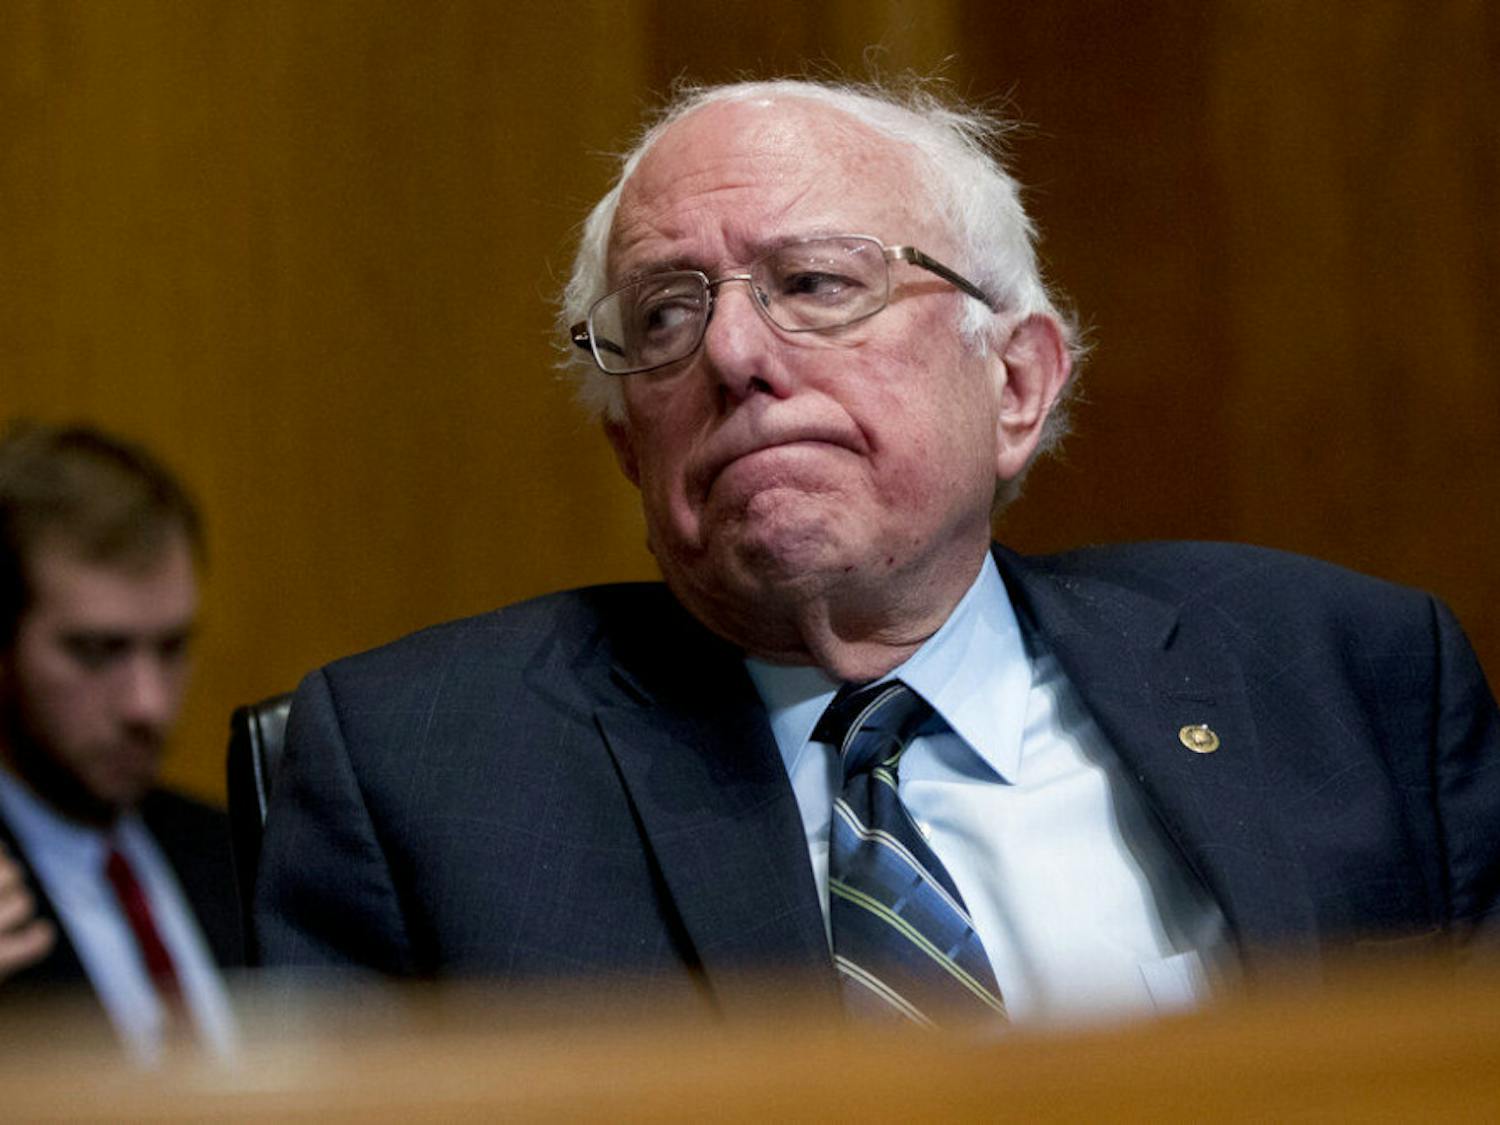 FILE - In this Jan. 16, 2019, photo, Sen. Bernie Sanders, I-Vt., reacts during a hearing on Capitol Hill in Washington. The growing Democratic presidential field is increasingly splitting into two camps: those who want to quickly overhaul economic systems that have existed for decades and those who favor more gradual change. (AP Photo/Andrew Harnik, File)